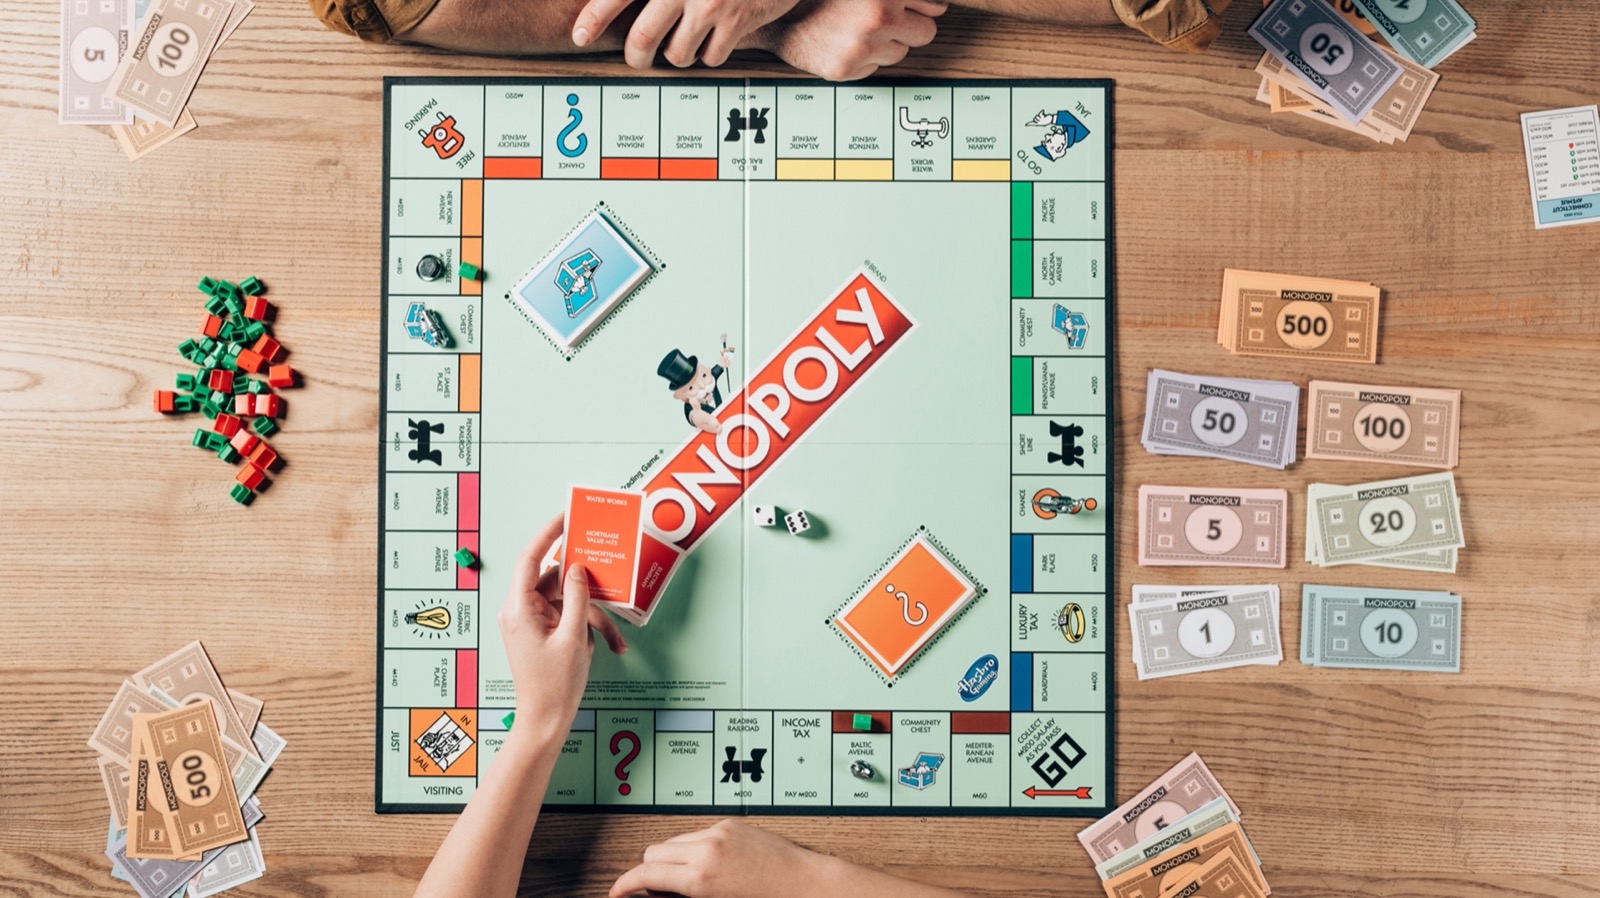 From Papyrus to Toilet Paper 🧻: This Is Likely the Hardest Quiz That’s All About Paper – Can You Pass It? Monopoly